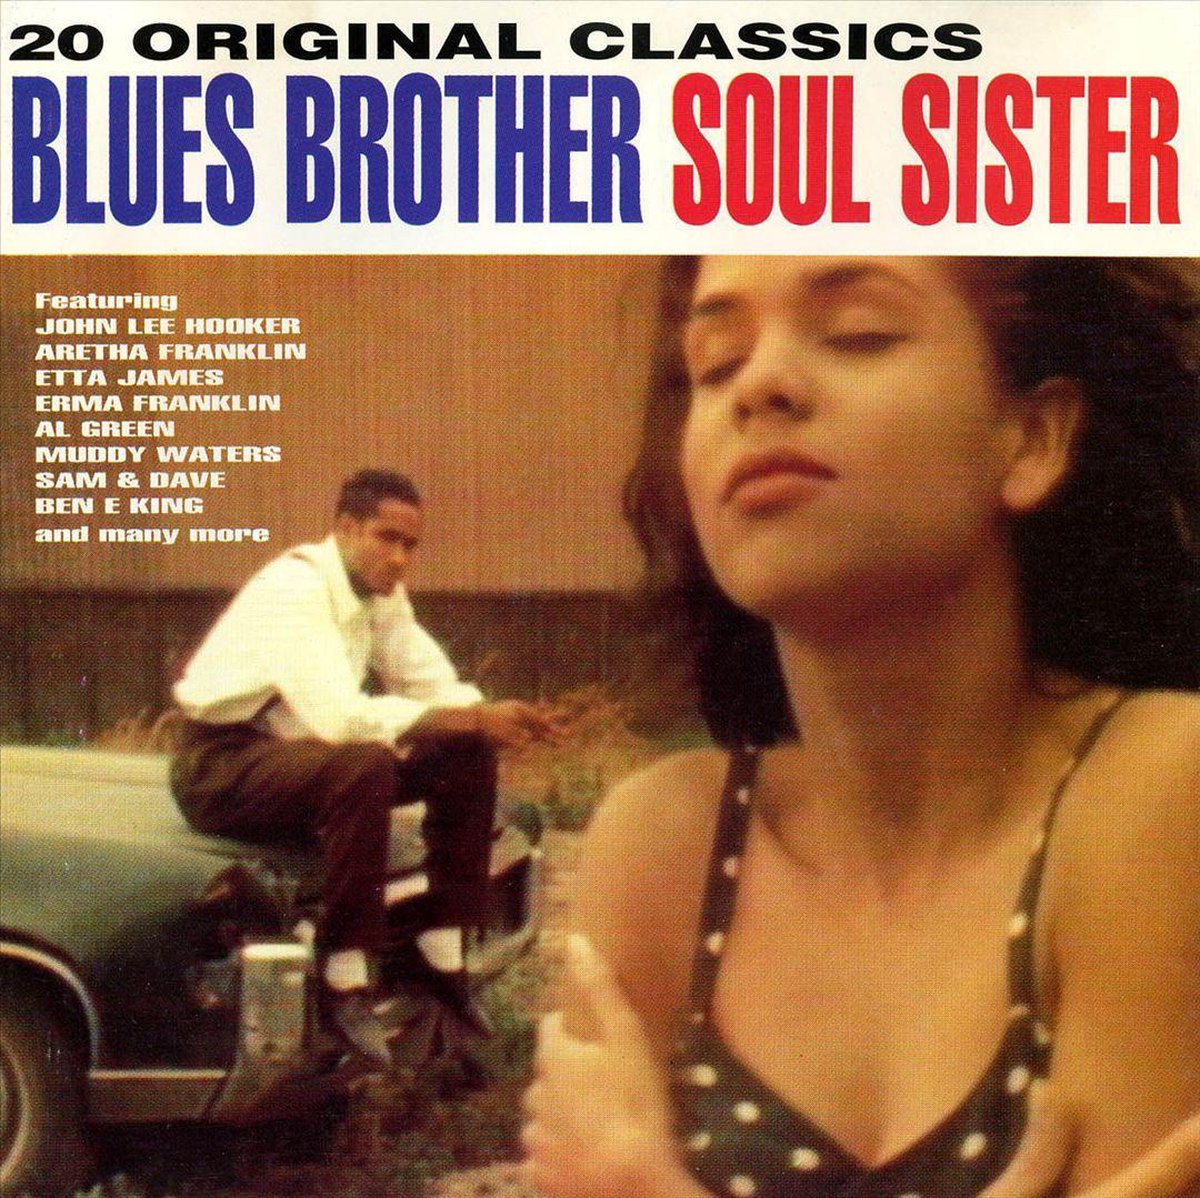 Blues Brother Soul Sister [Dino] - various artists